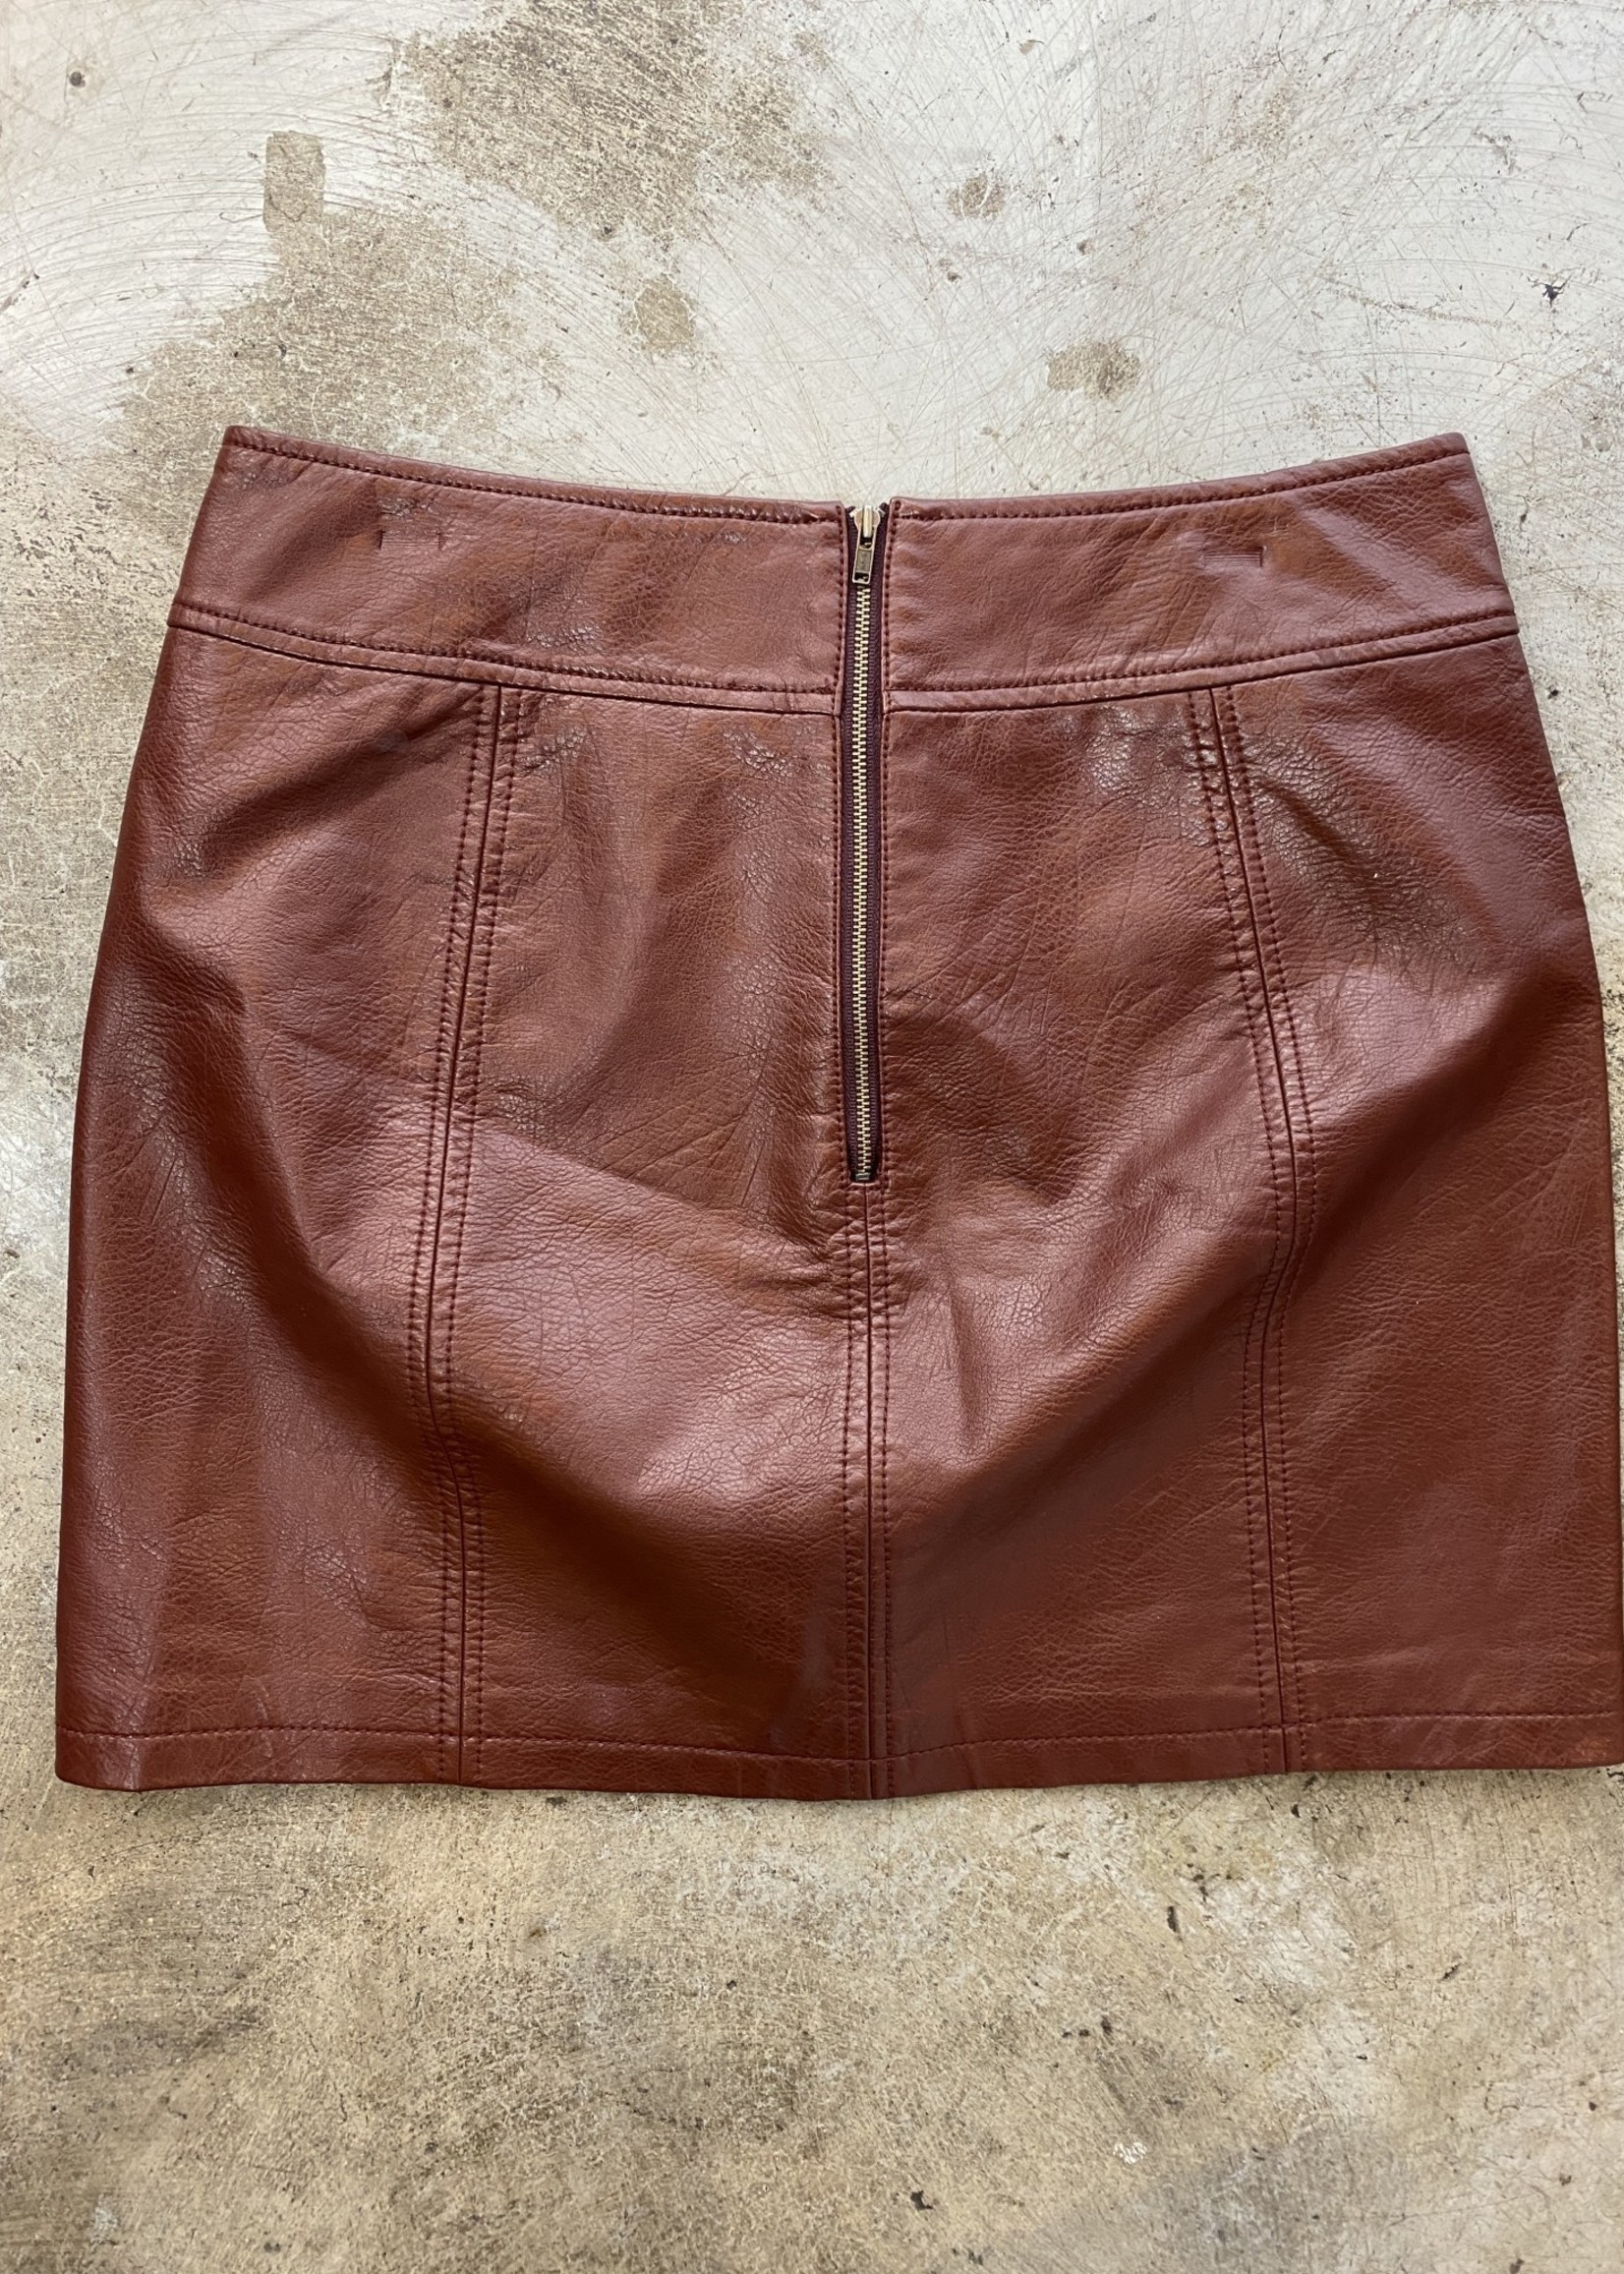 Free People Dark Red Faux Leather Skirt 31 M